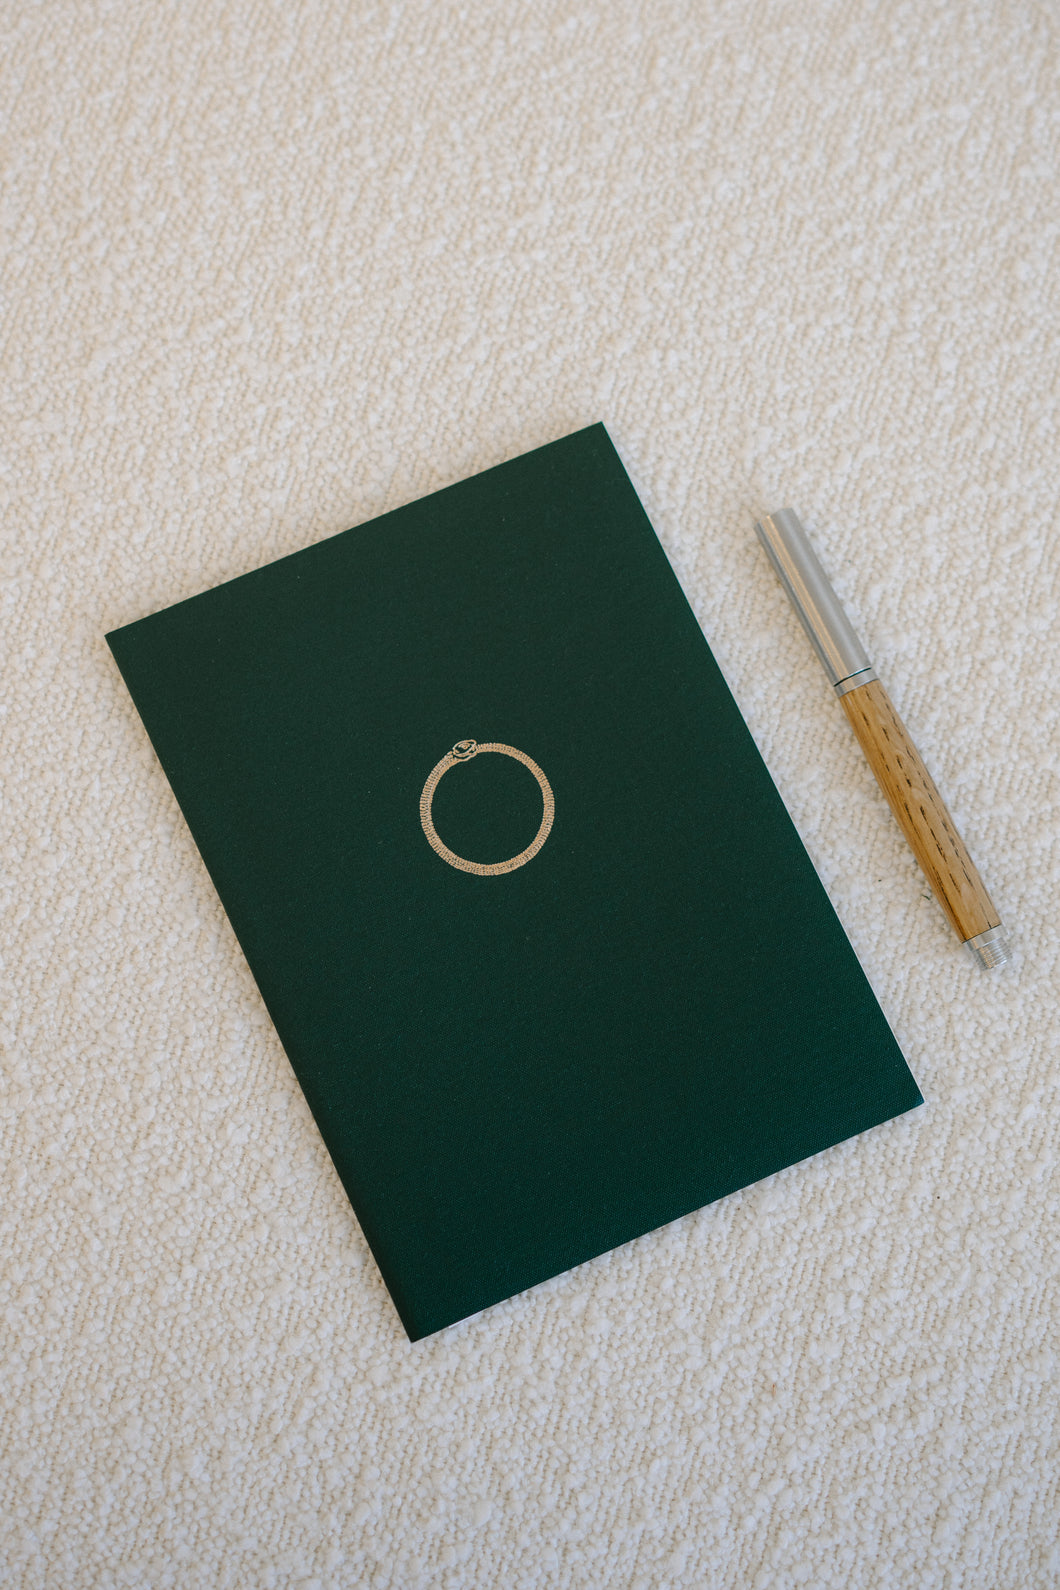 EXTRA LARGE Ouroboros Hard Cover Notebook